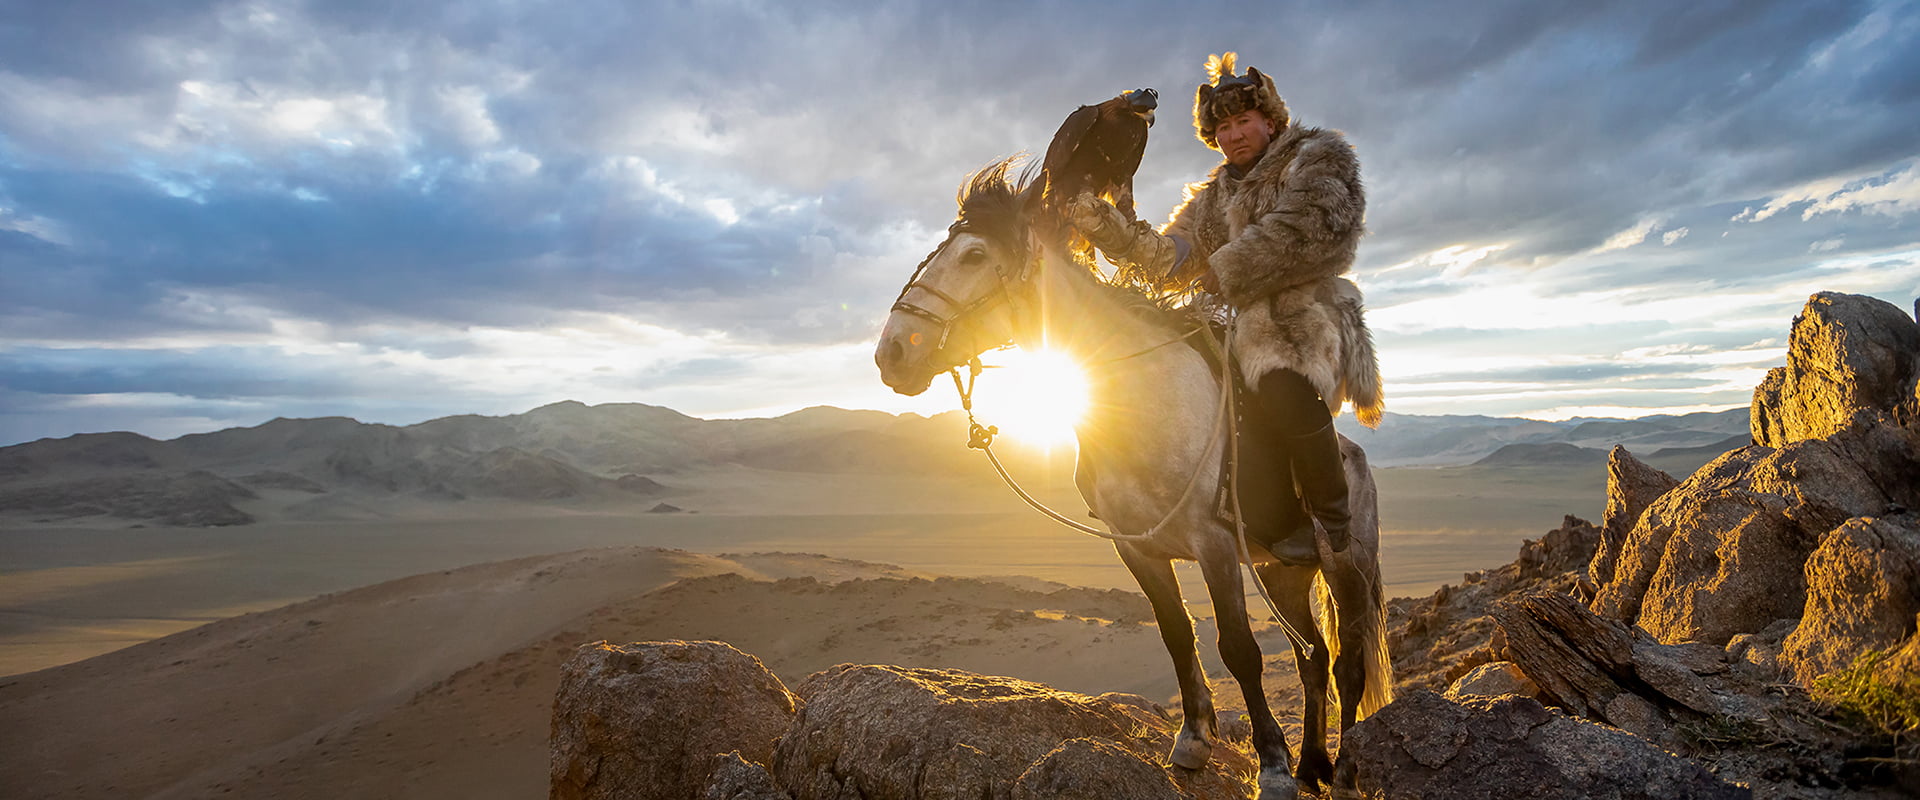 Botei Rys, a Kazakh Eagle Hunter with his eagle from Altansogts district of Bayan-Olgii Province in Western Mongolia.